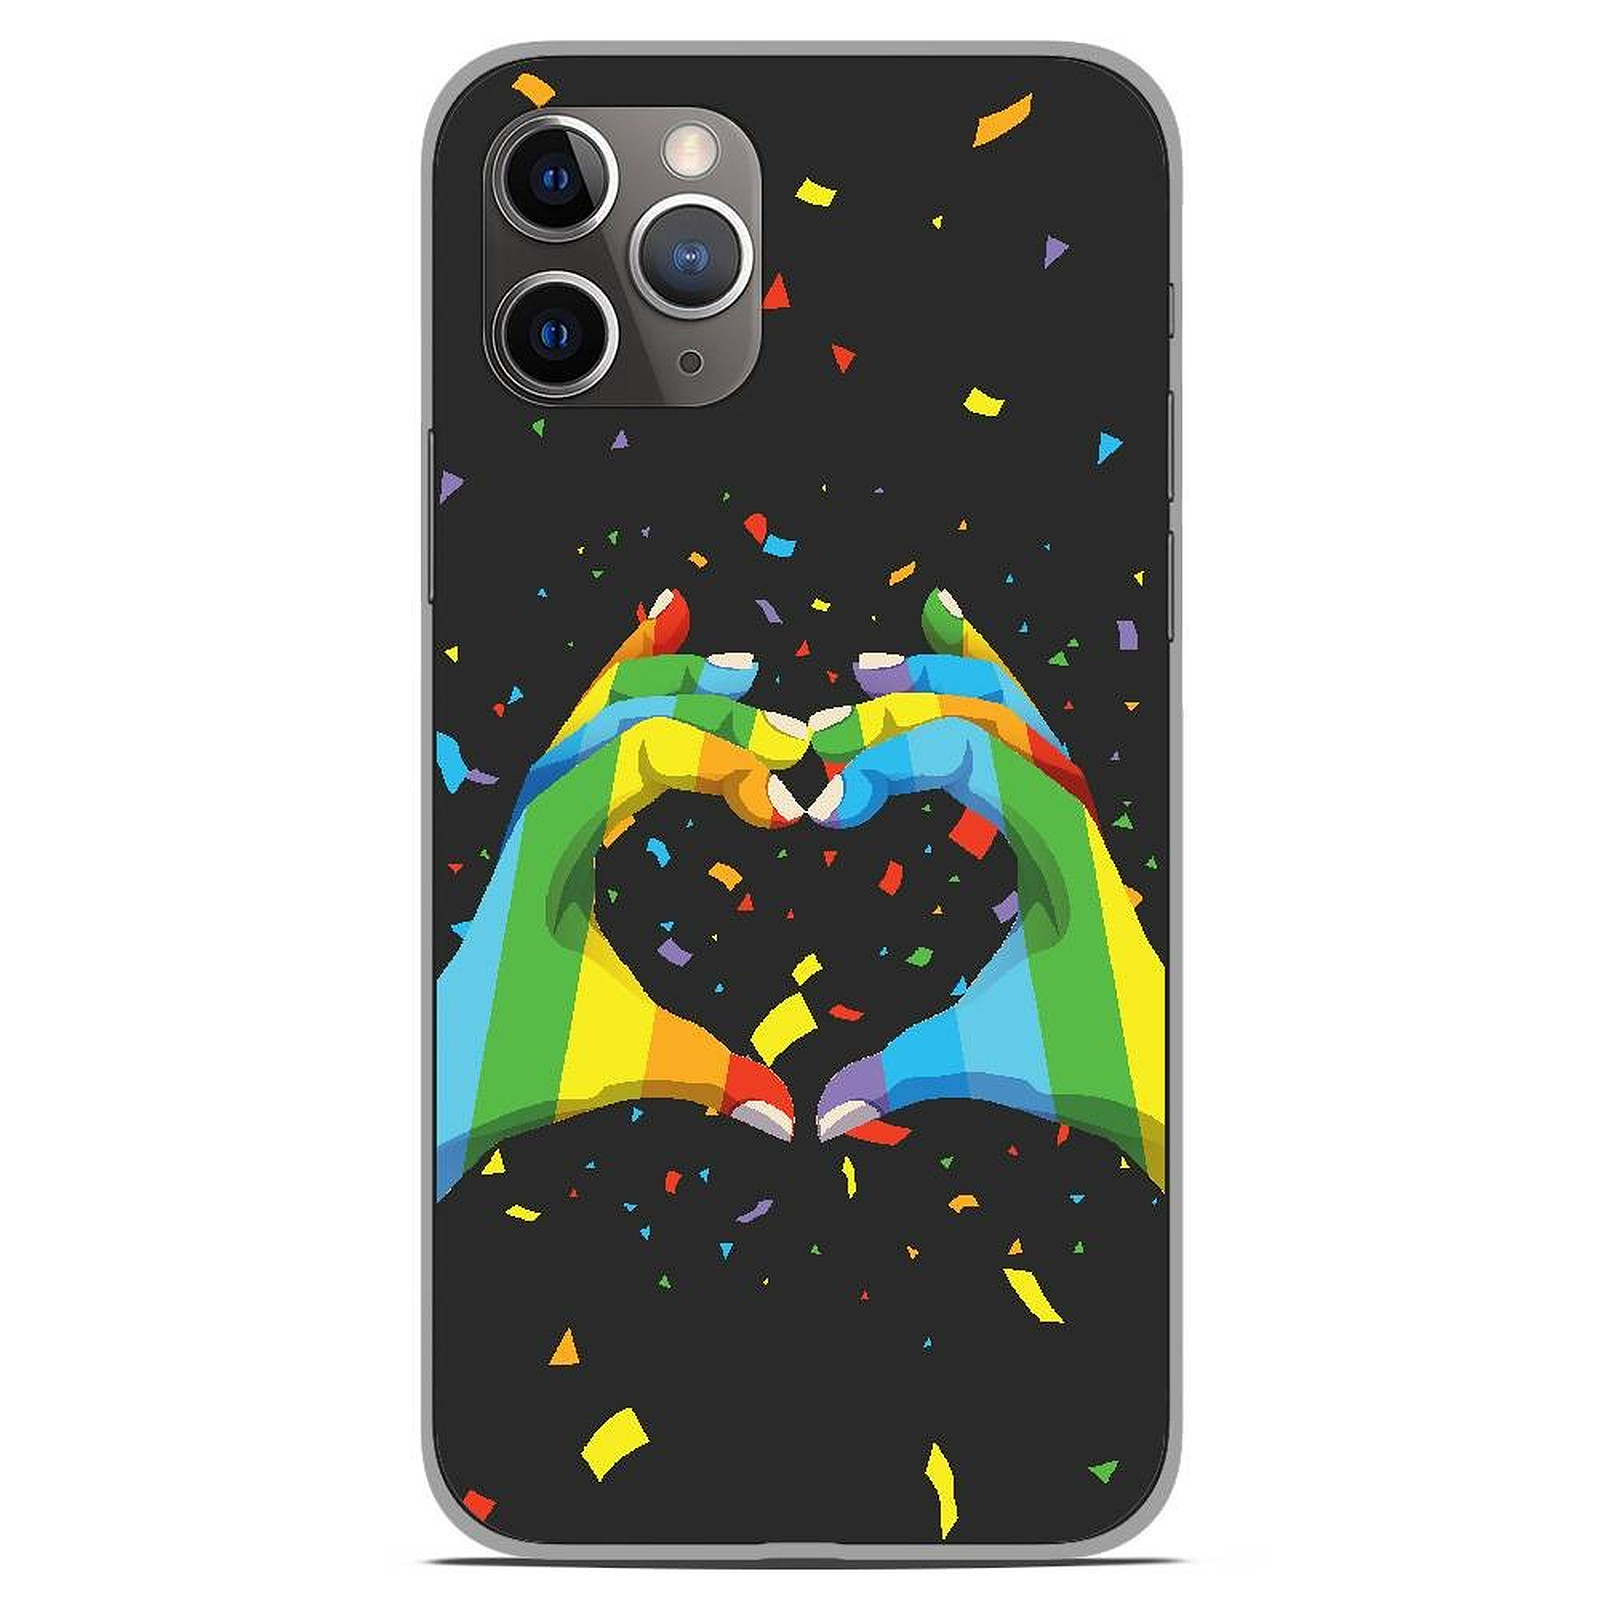 1001 Coques Coque silicone gel Apple iPhone 11 Pro motif LGBT - Coque telephone 1001Coques